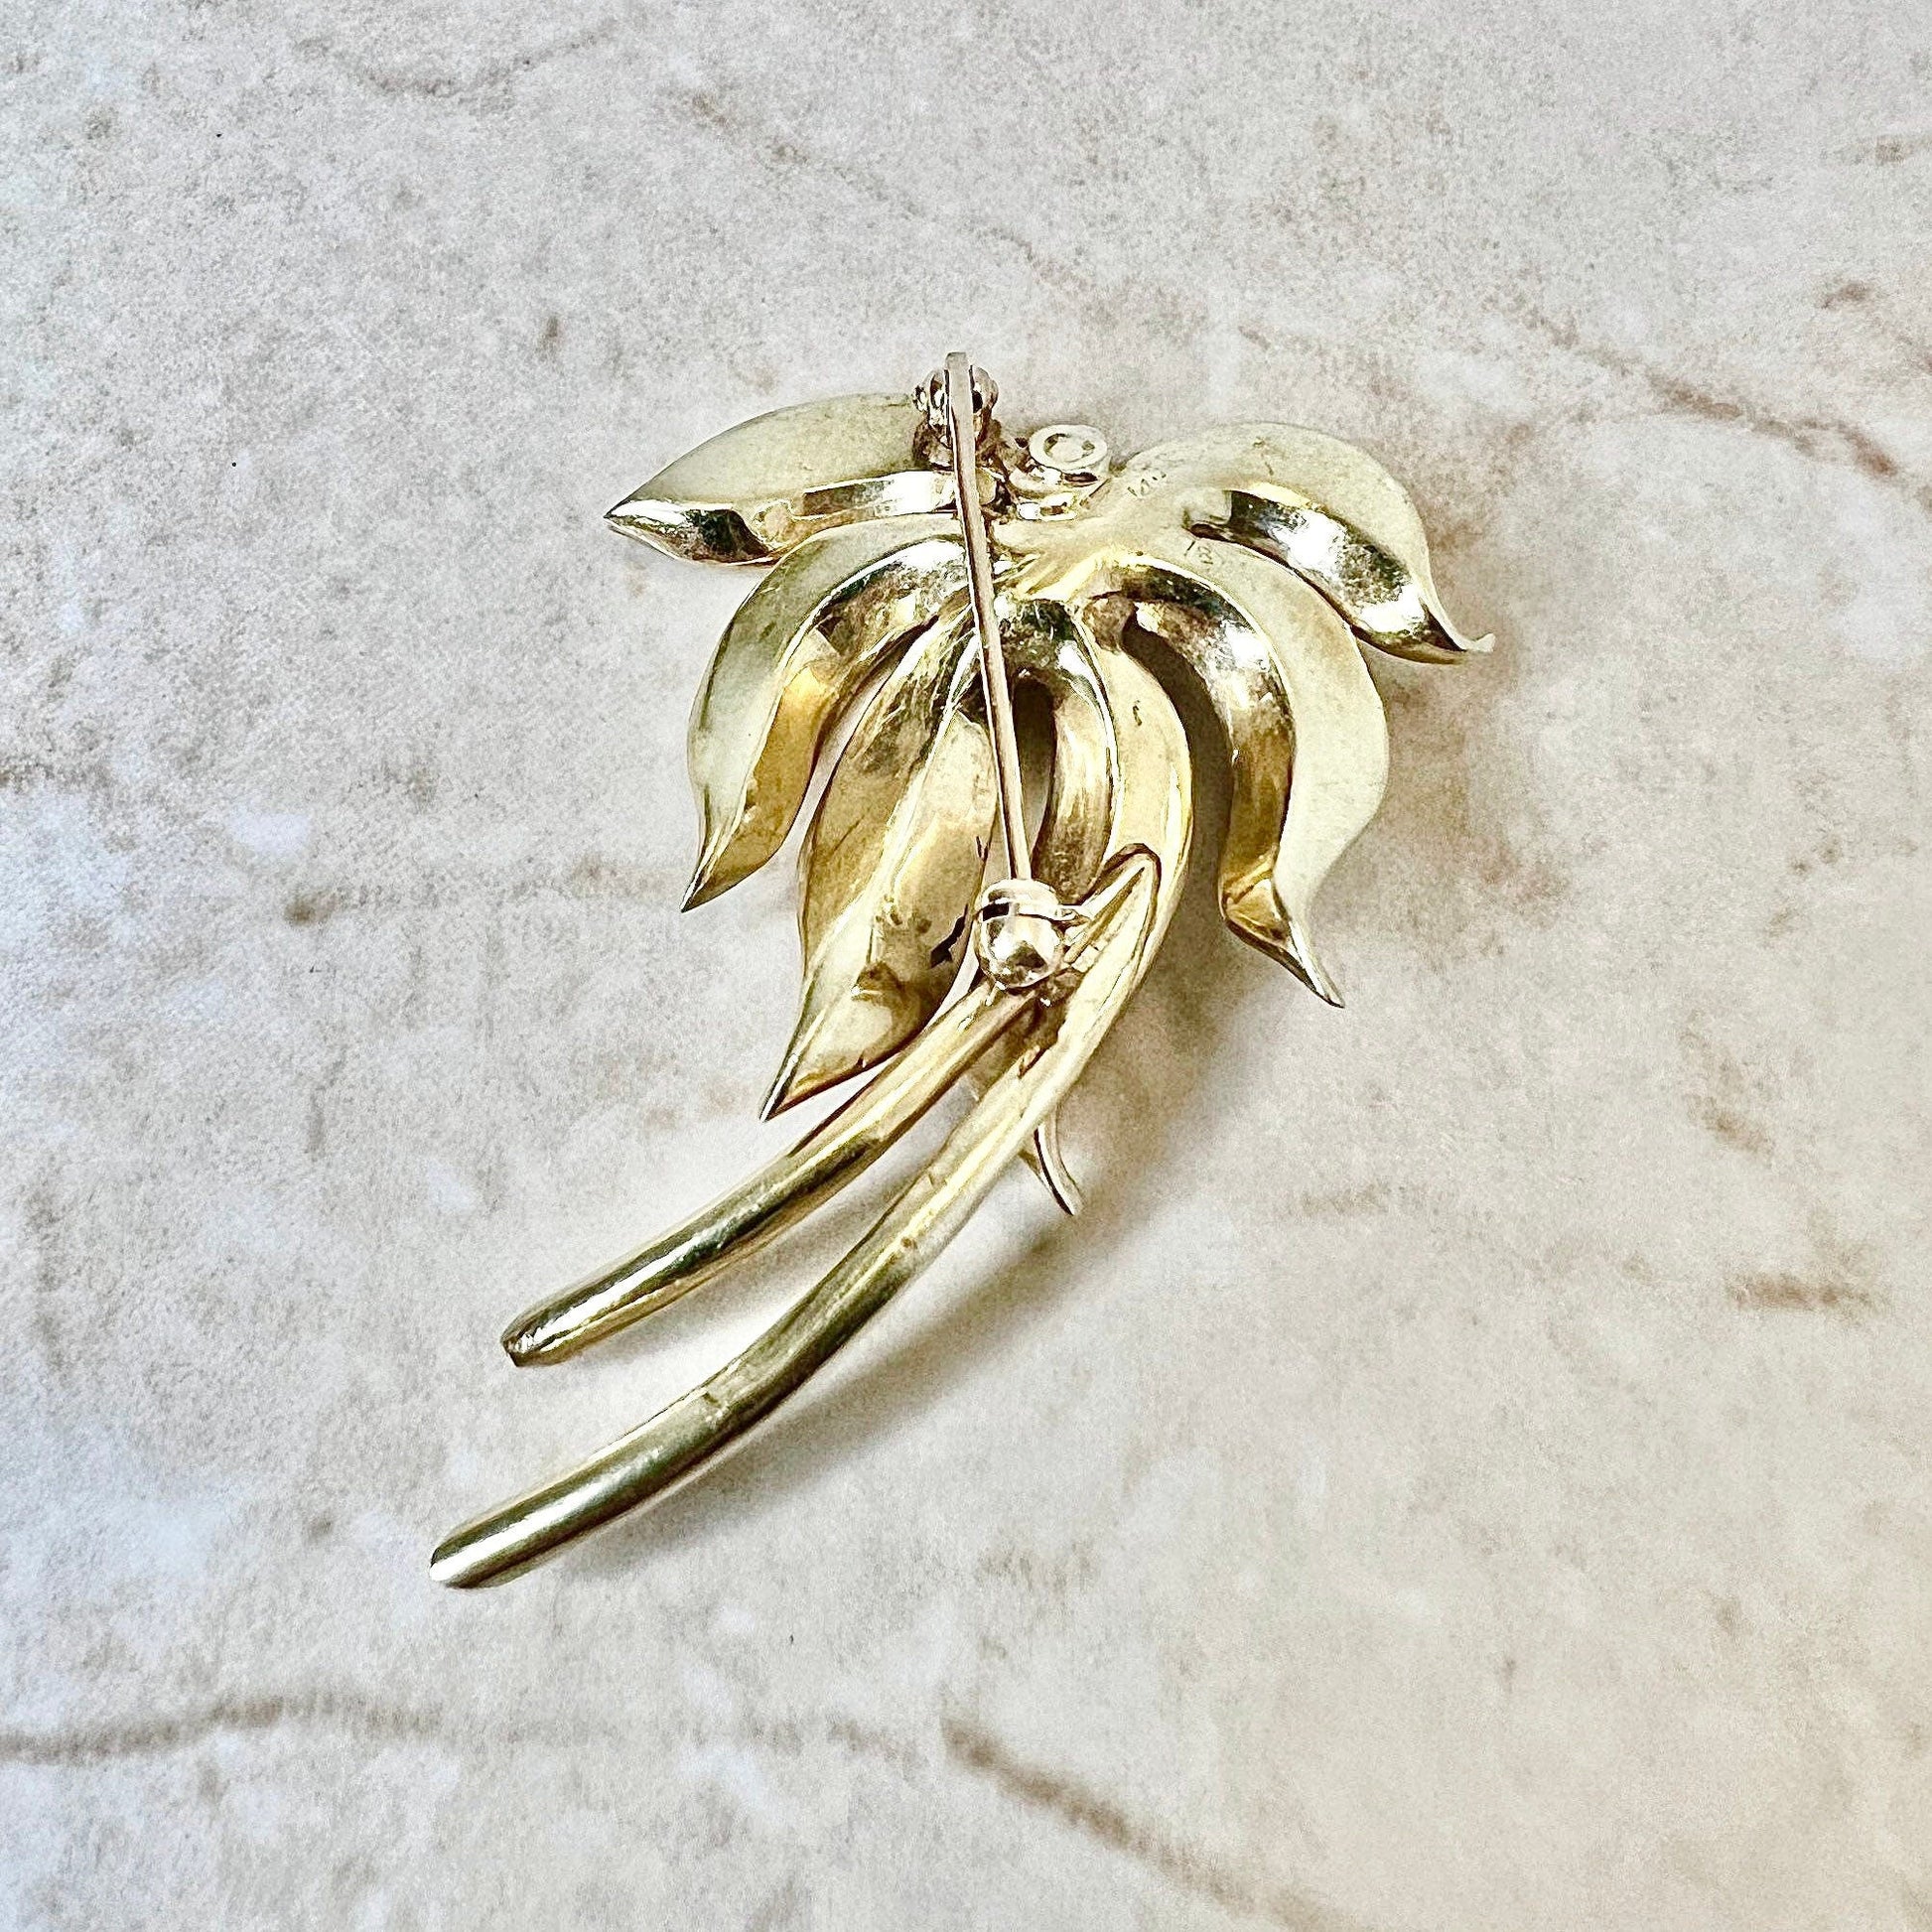 Vintage 14K Emerald & Diamond Brooch - Yellow Gold Flower Brooch - Emerald Pin - May Birthstone - Best Birthday Gift For Her - Jewelry Sale